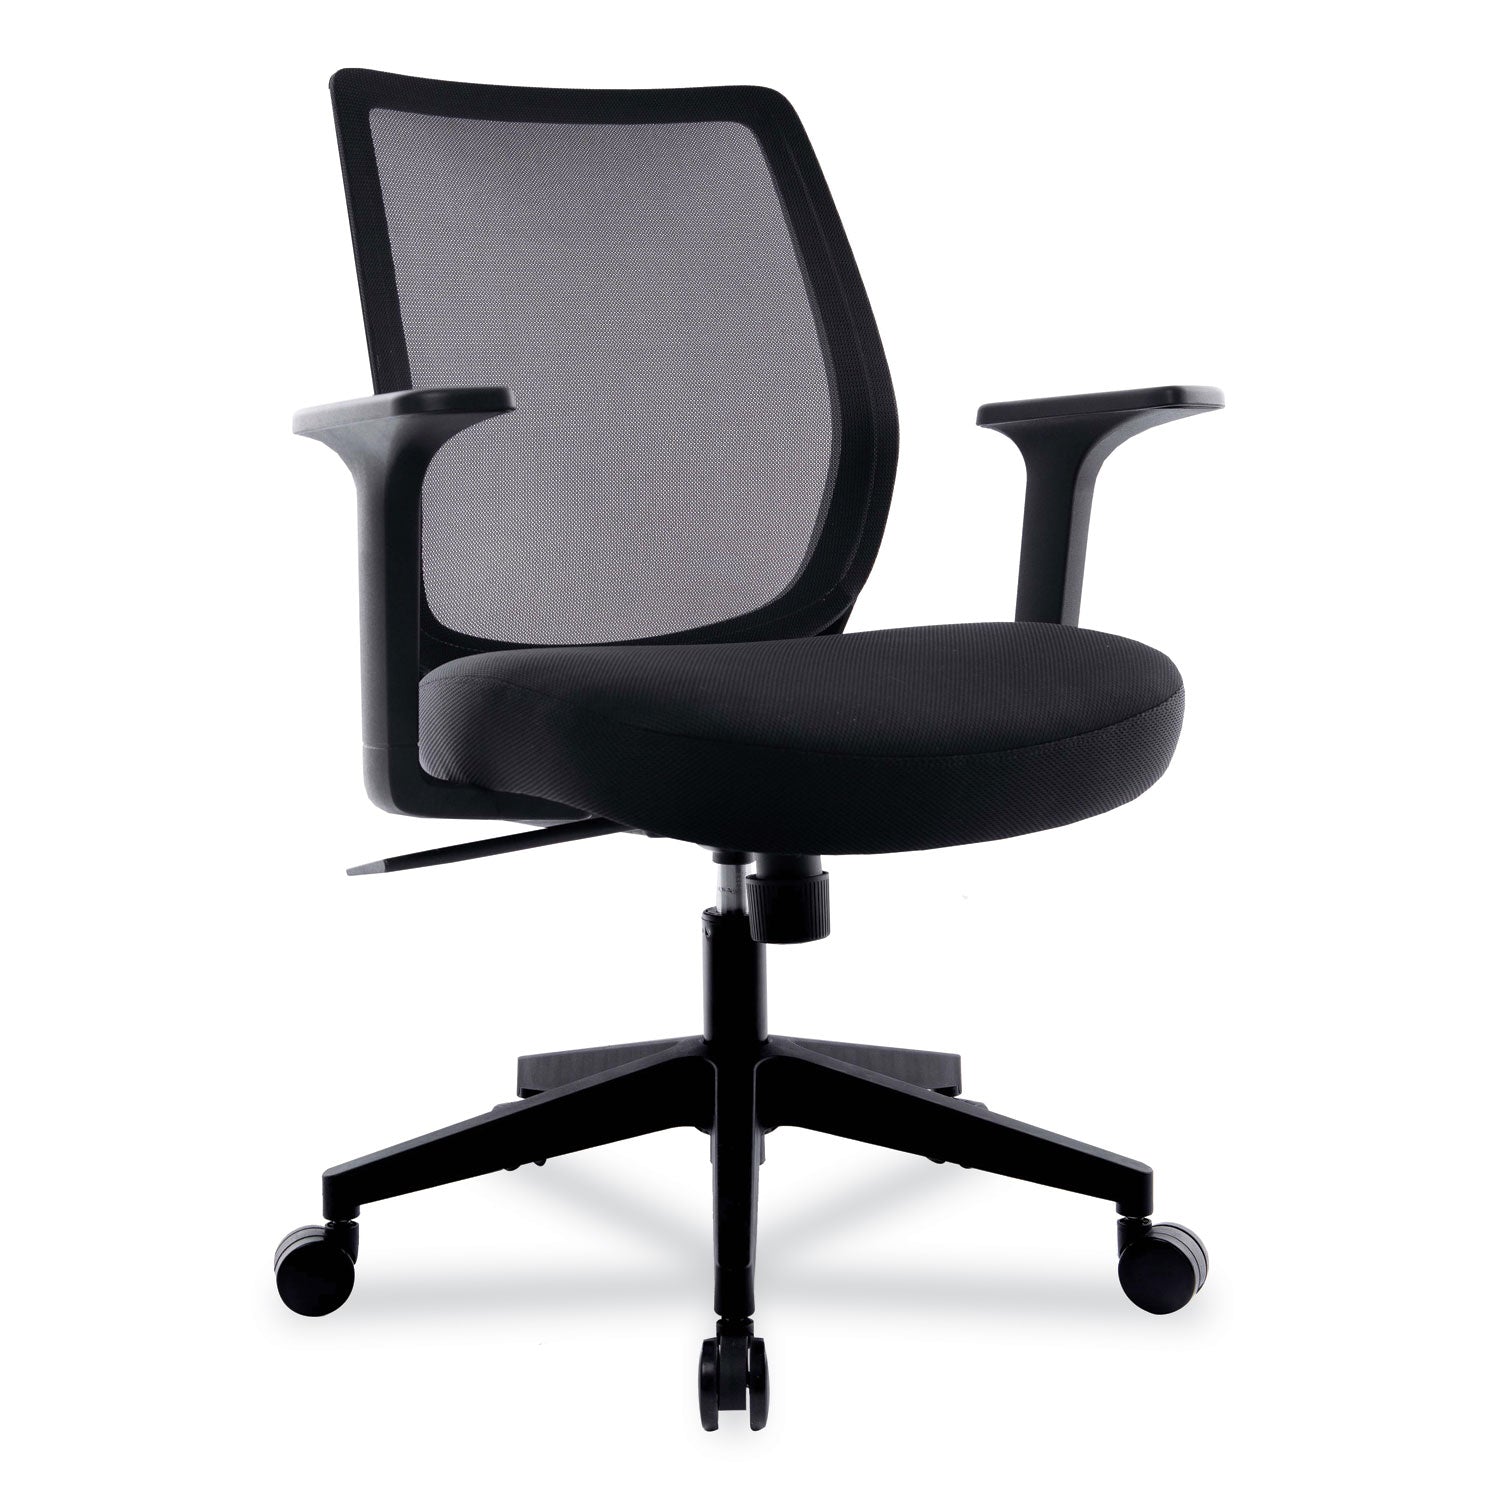 essentials-mesh-back-fabric-task-chair-with-arms-supports-up-to-275-lb-black-fabric-seat-black-mesh-back-black-base_uos24398920 - 1